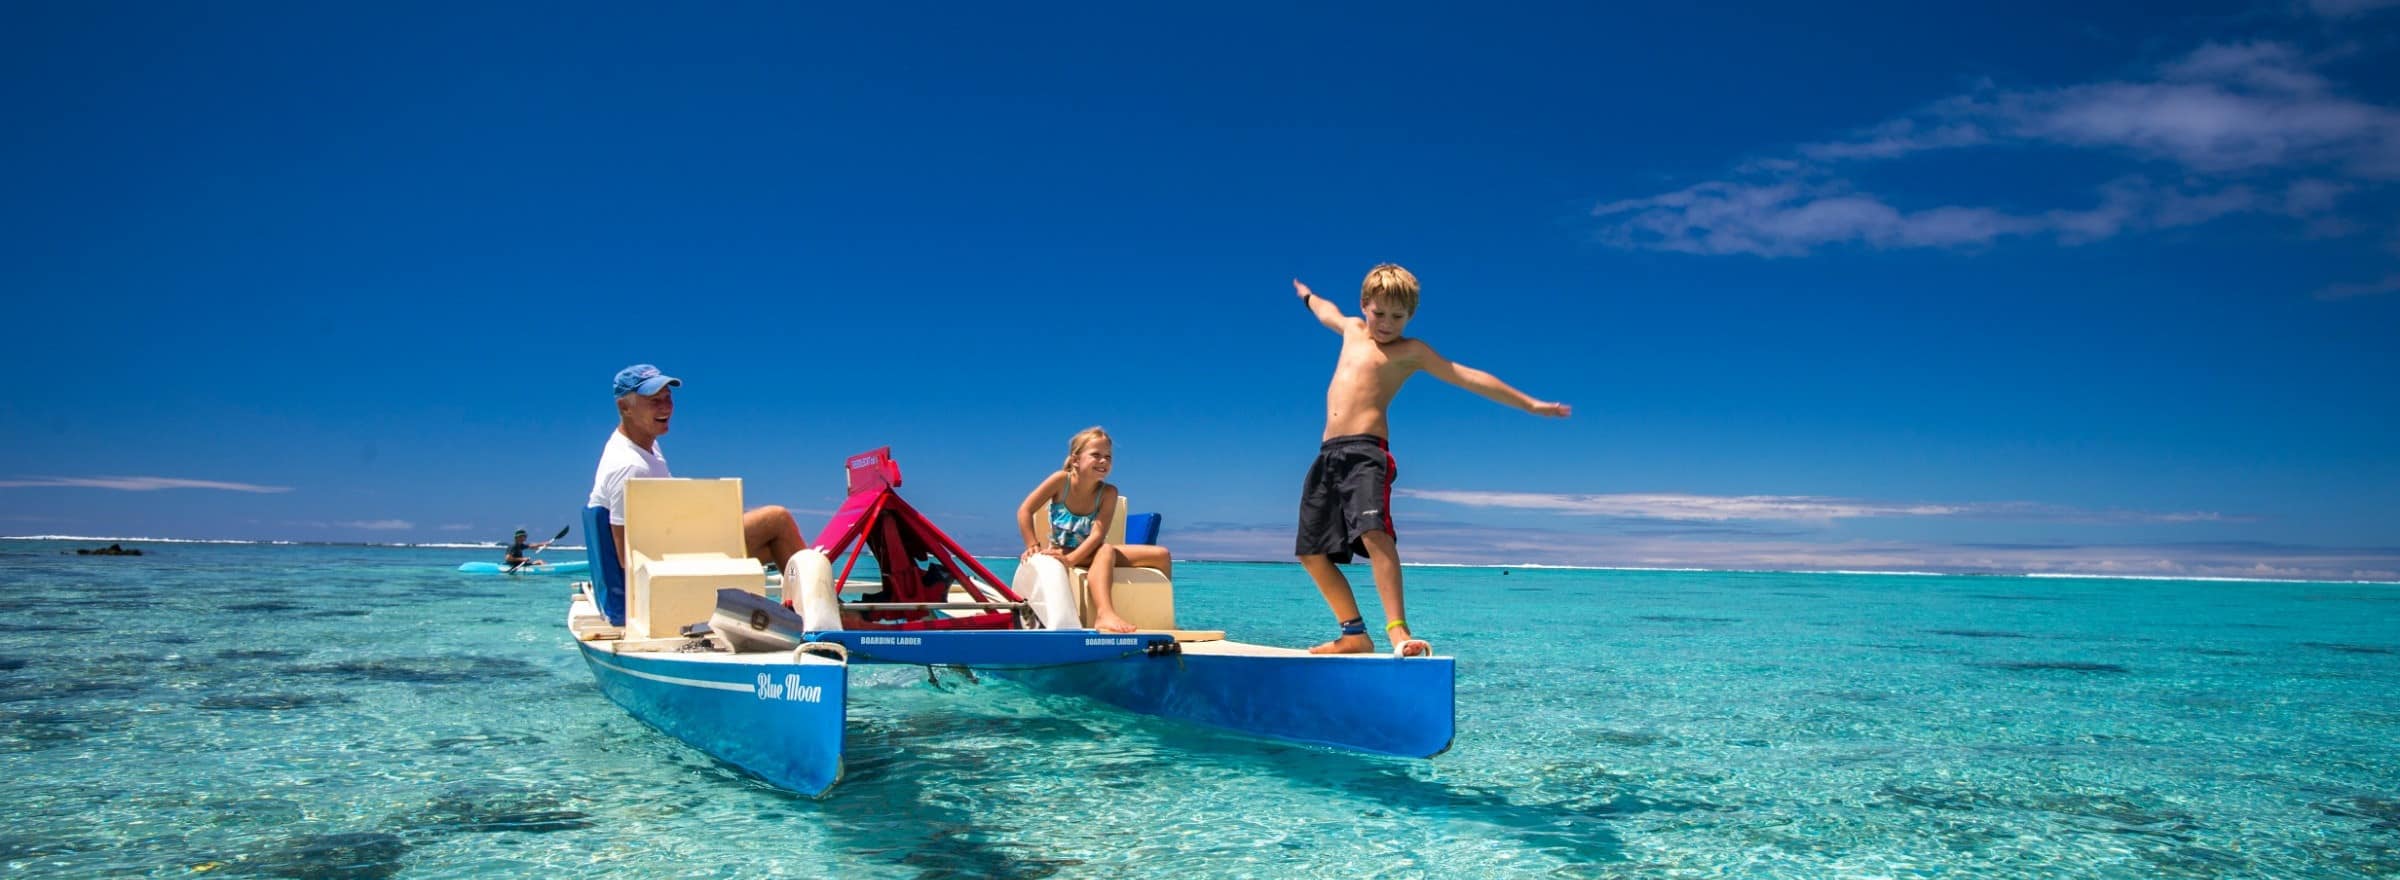 Best Family Friendly Resorts in Cook Islands